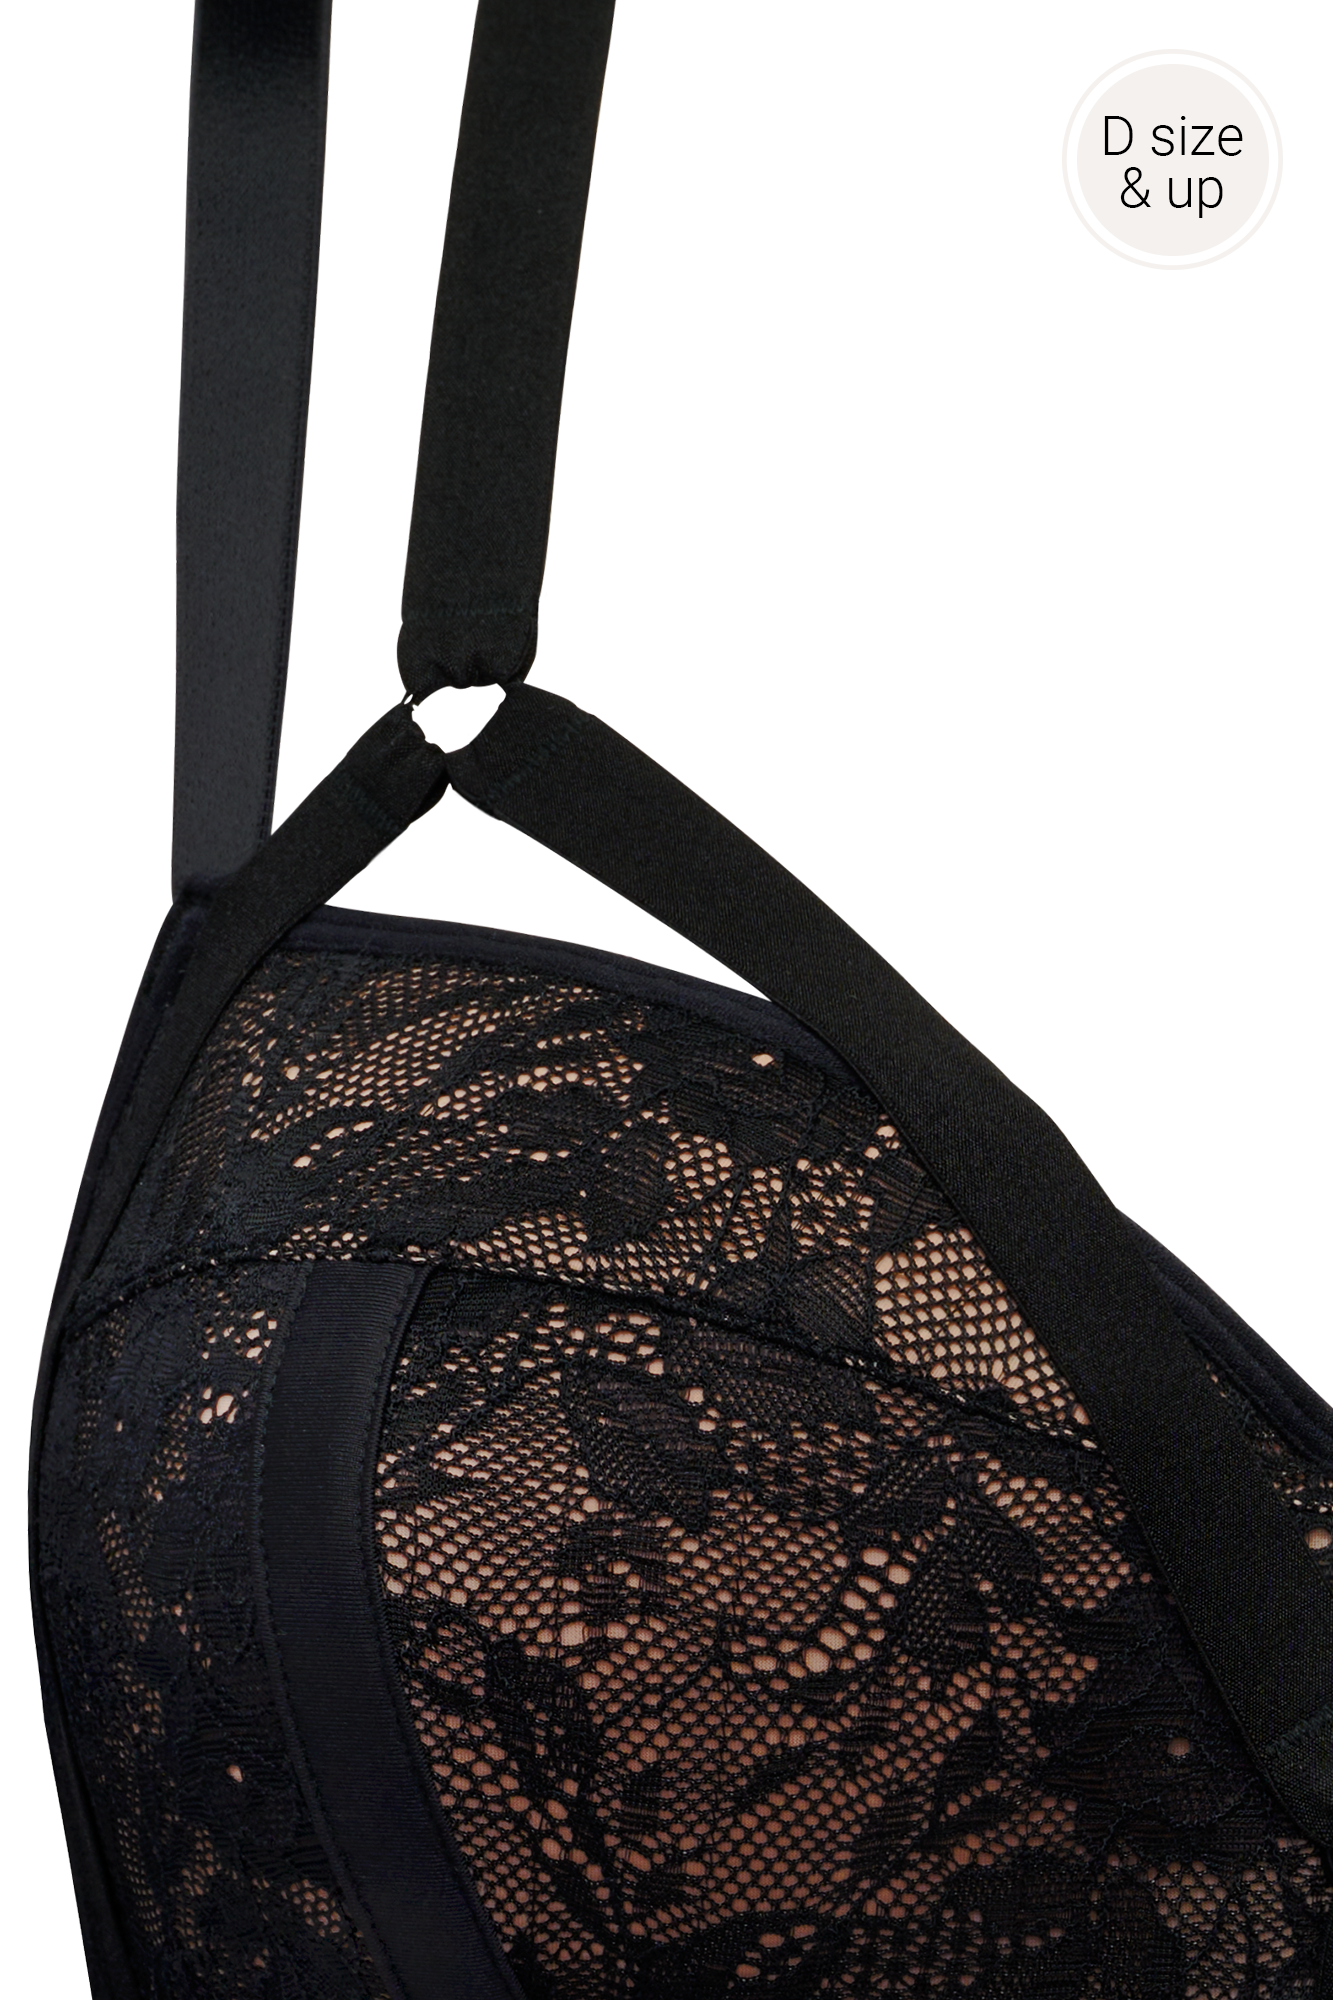 Marlies Dekkers taboo balconette bh wired padded black and sand